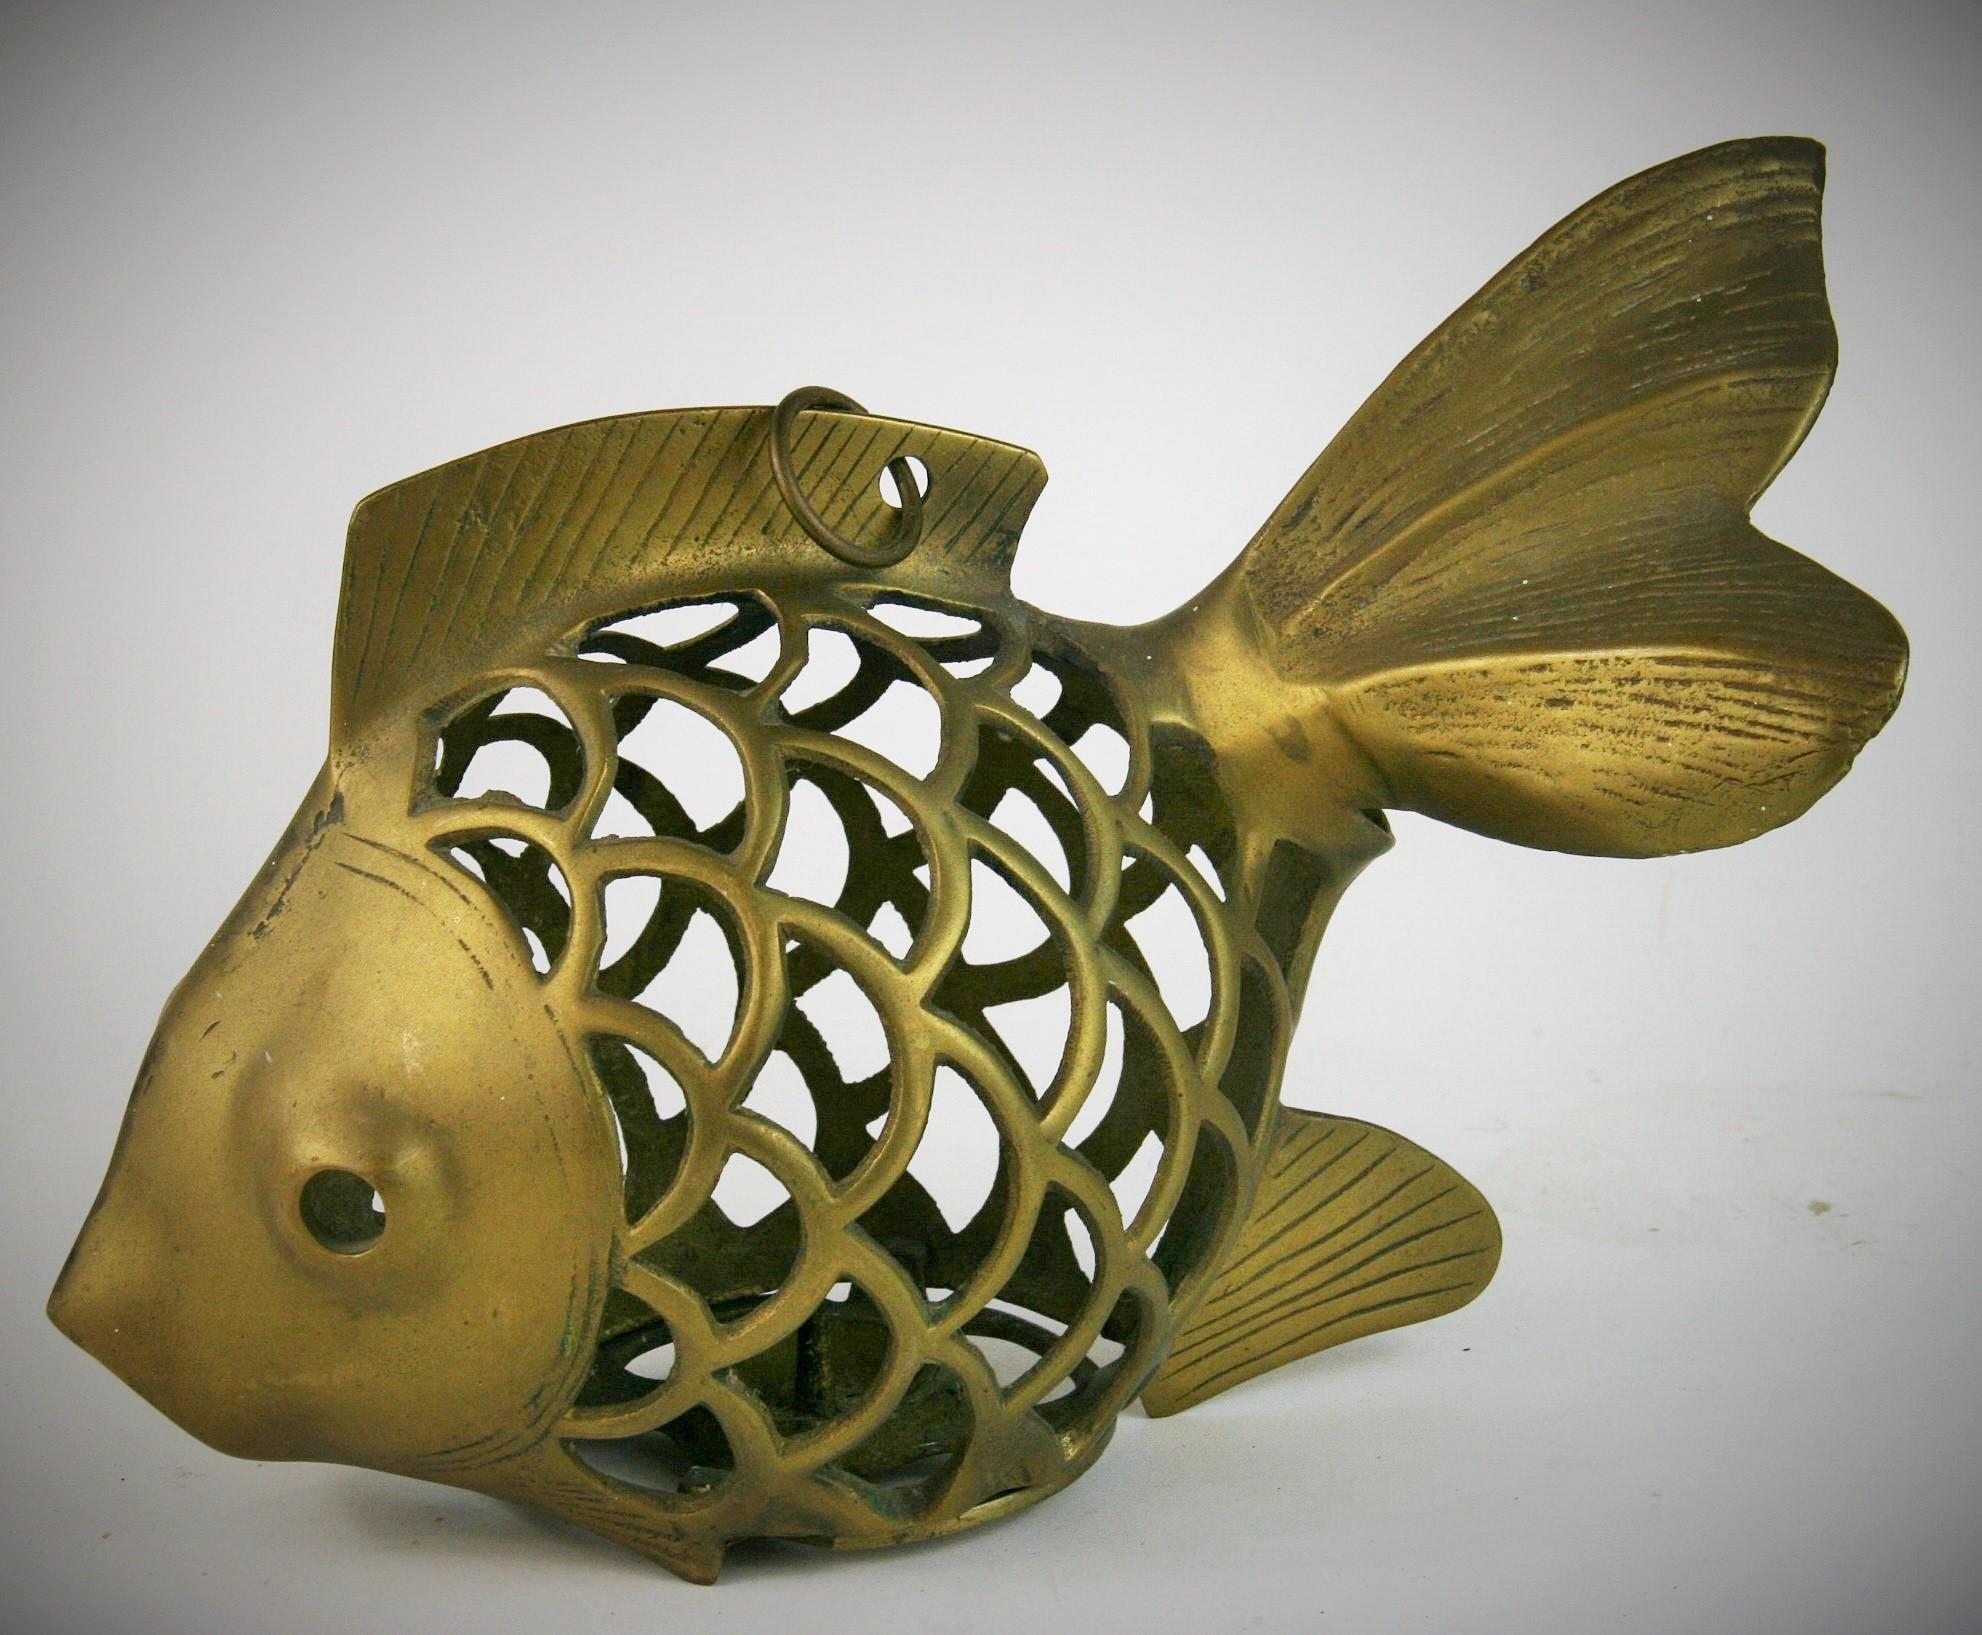 3-435 Japanese brass Koi fish garden candle lantern sculpture
Can be place flat or hung by loop on top.
  